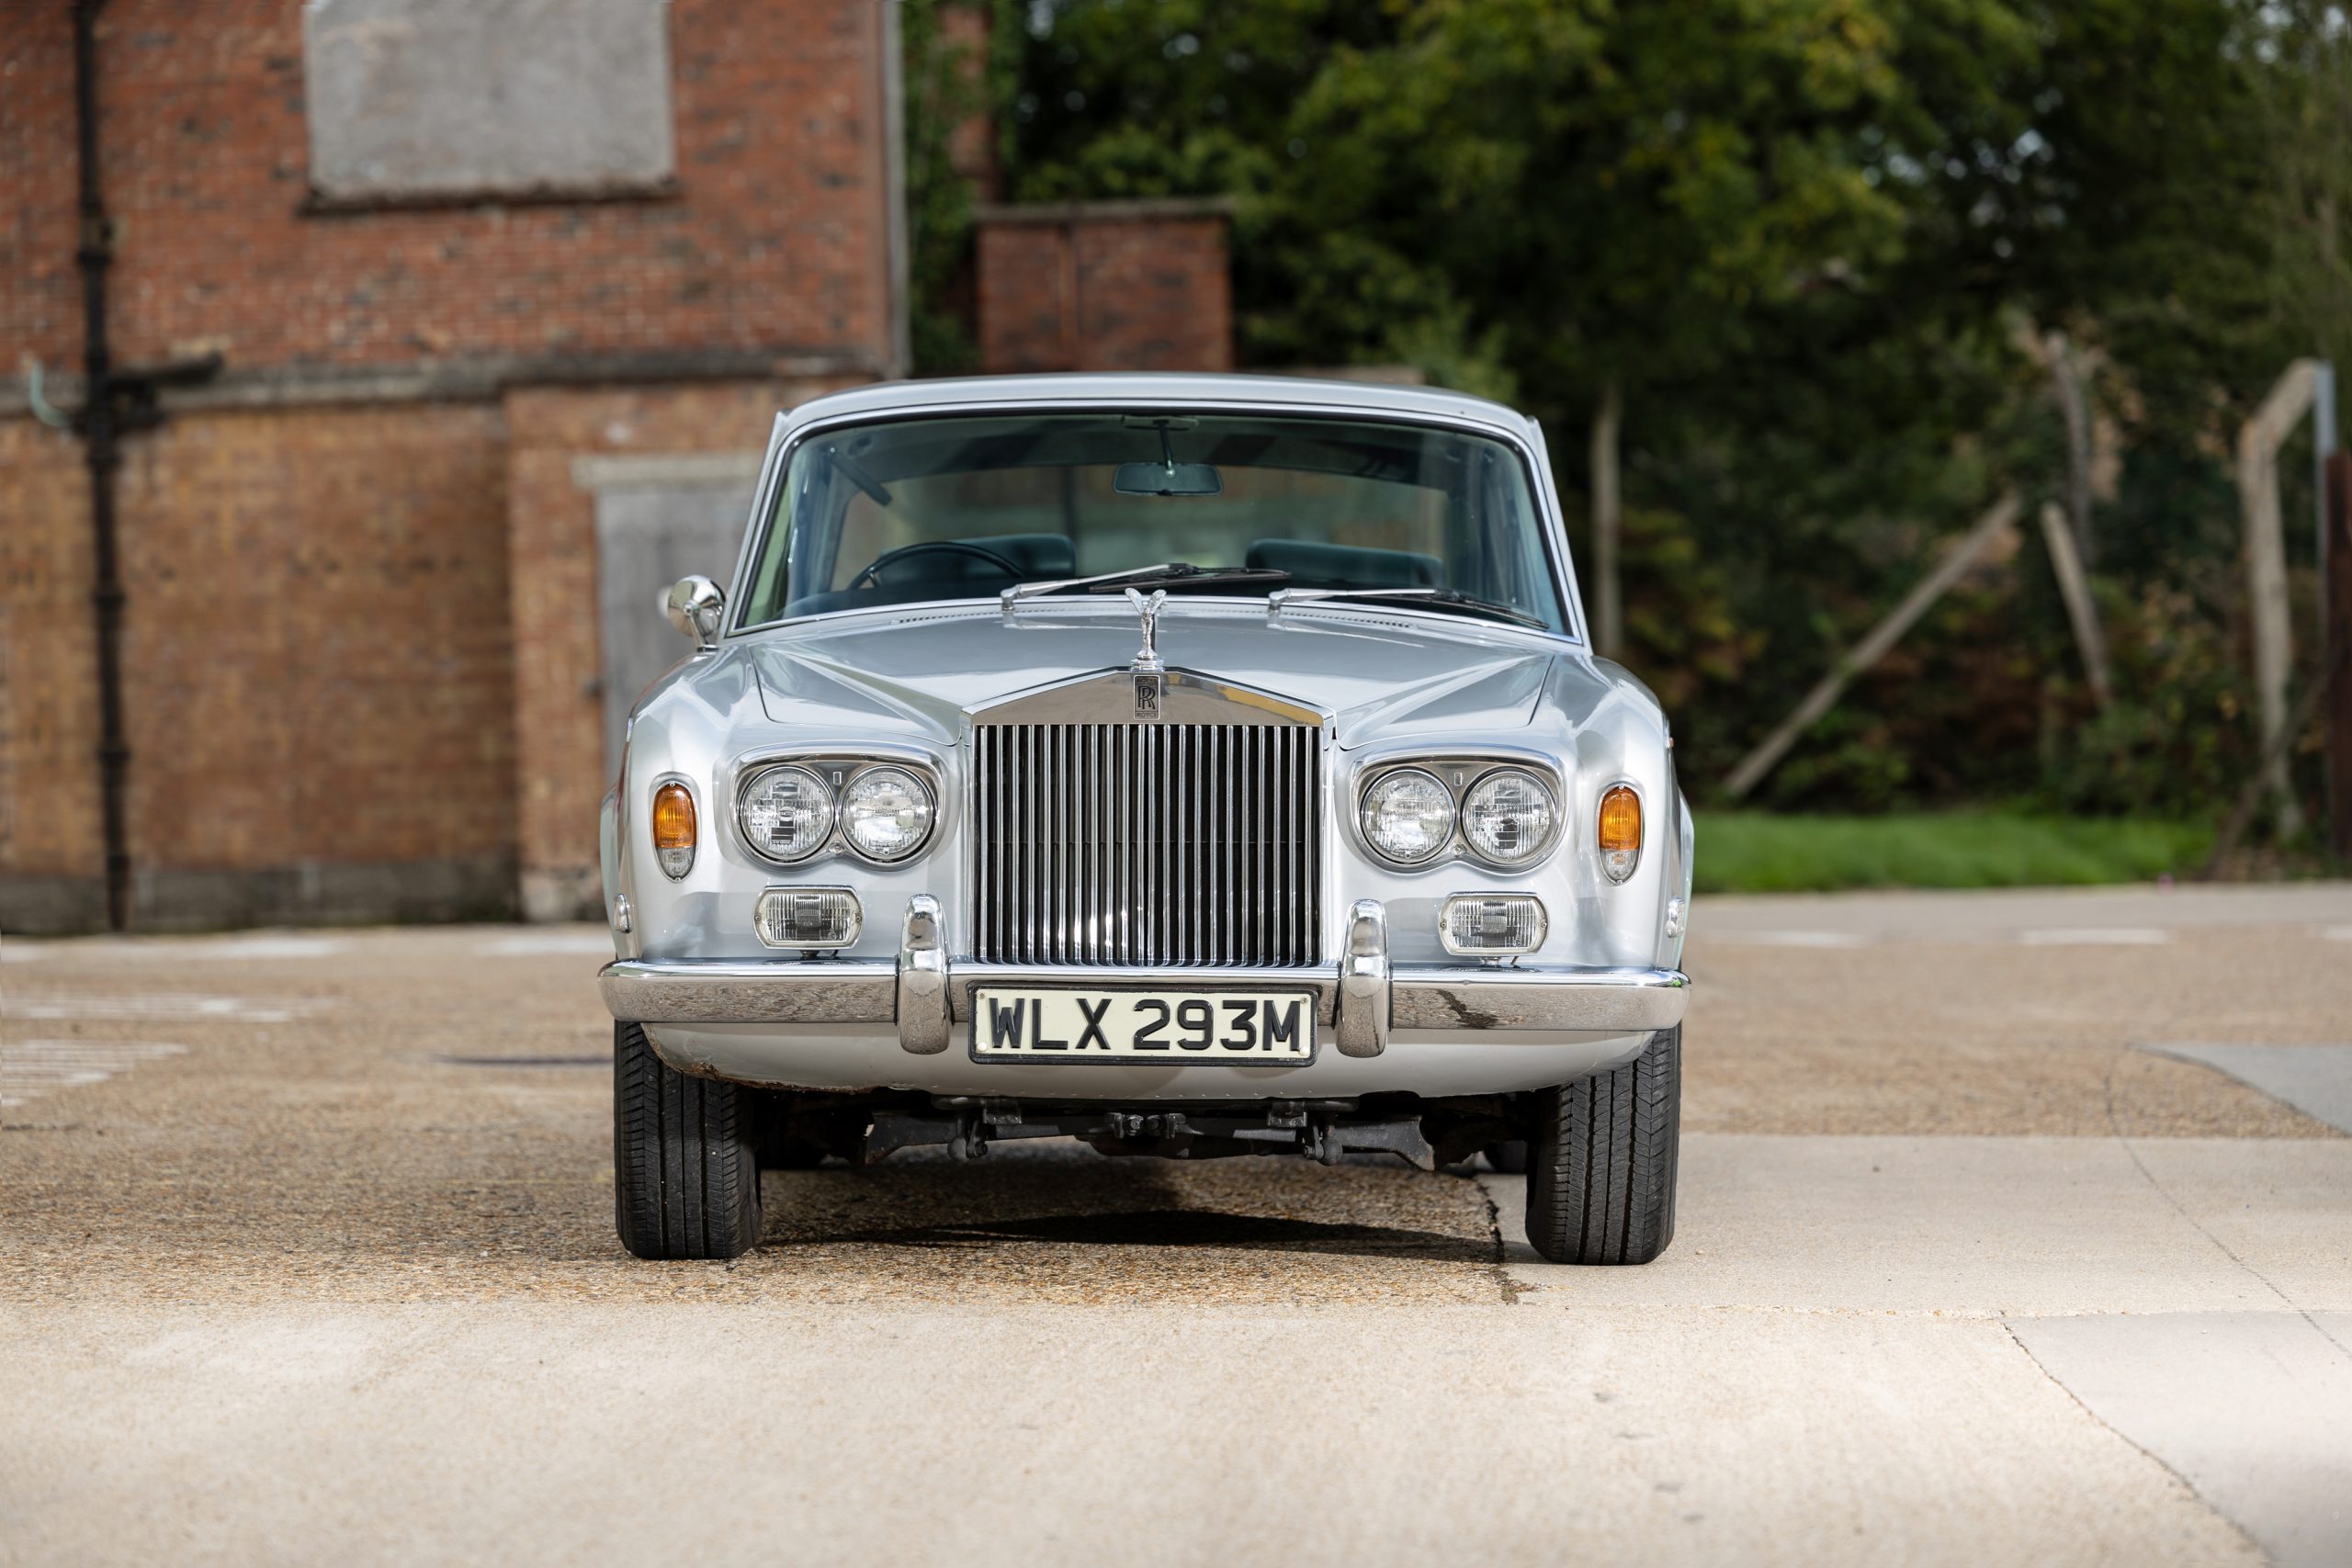 Elizabeth Taylors 61 RollsRoyce Is Heading to Auction at Guernseys   Robb Report